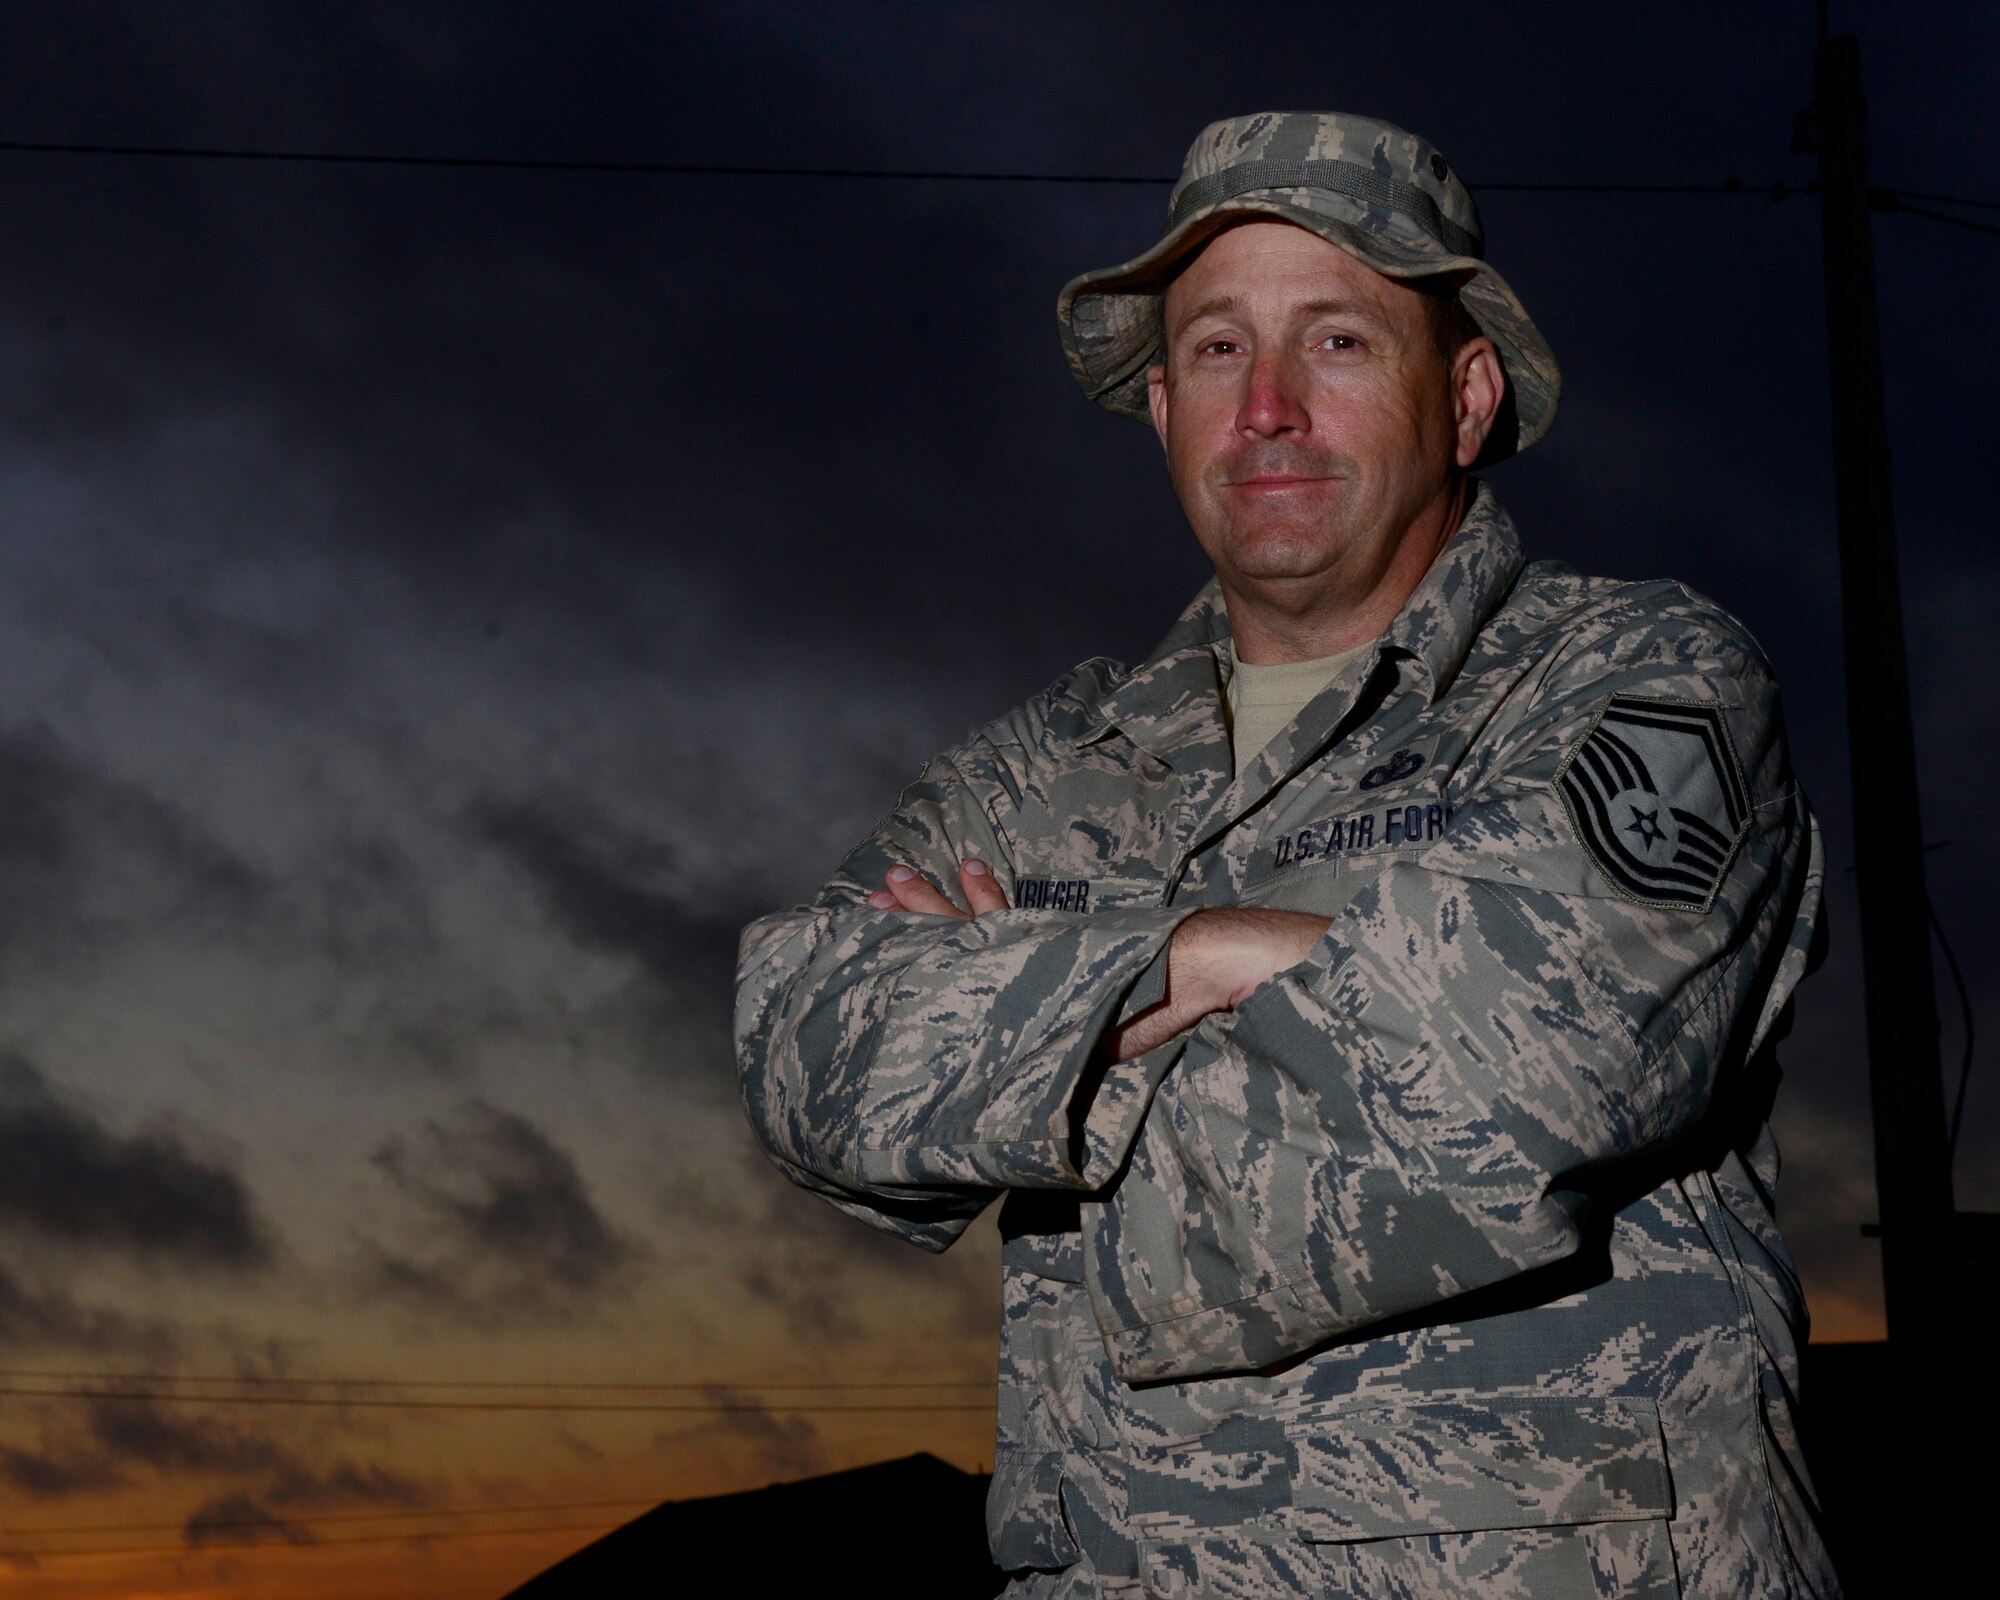 U.S. Air Force Senior MSgt. Klint Krieger, 403rd Security Forces Squadron exercise company first sergeant, stands outside his tent during AFRICAN LION 16 at Tifnit, Kingdom of Morocco, April 23, 2016. Krieger is an Air Force Reservist and the majority of the Air Force contingent are Air Force Reservists or Air Guardsmen. 400 U.S. service members joined with over 350 personnel from 10 other countries to create a foundation for future partnerships and provide training to all nations on command post activities and peace support operations. (U.S. Air Force photo by Senior Airman Krystal Ardrey/Released)